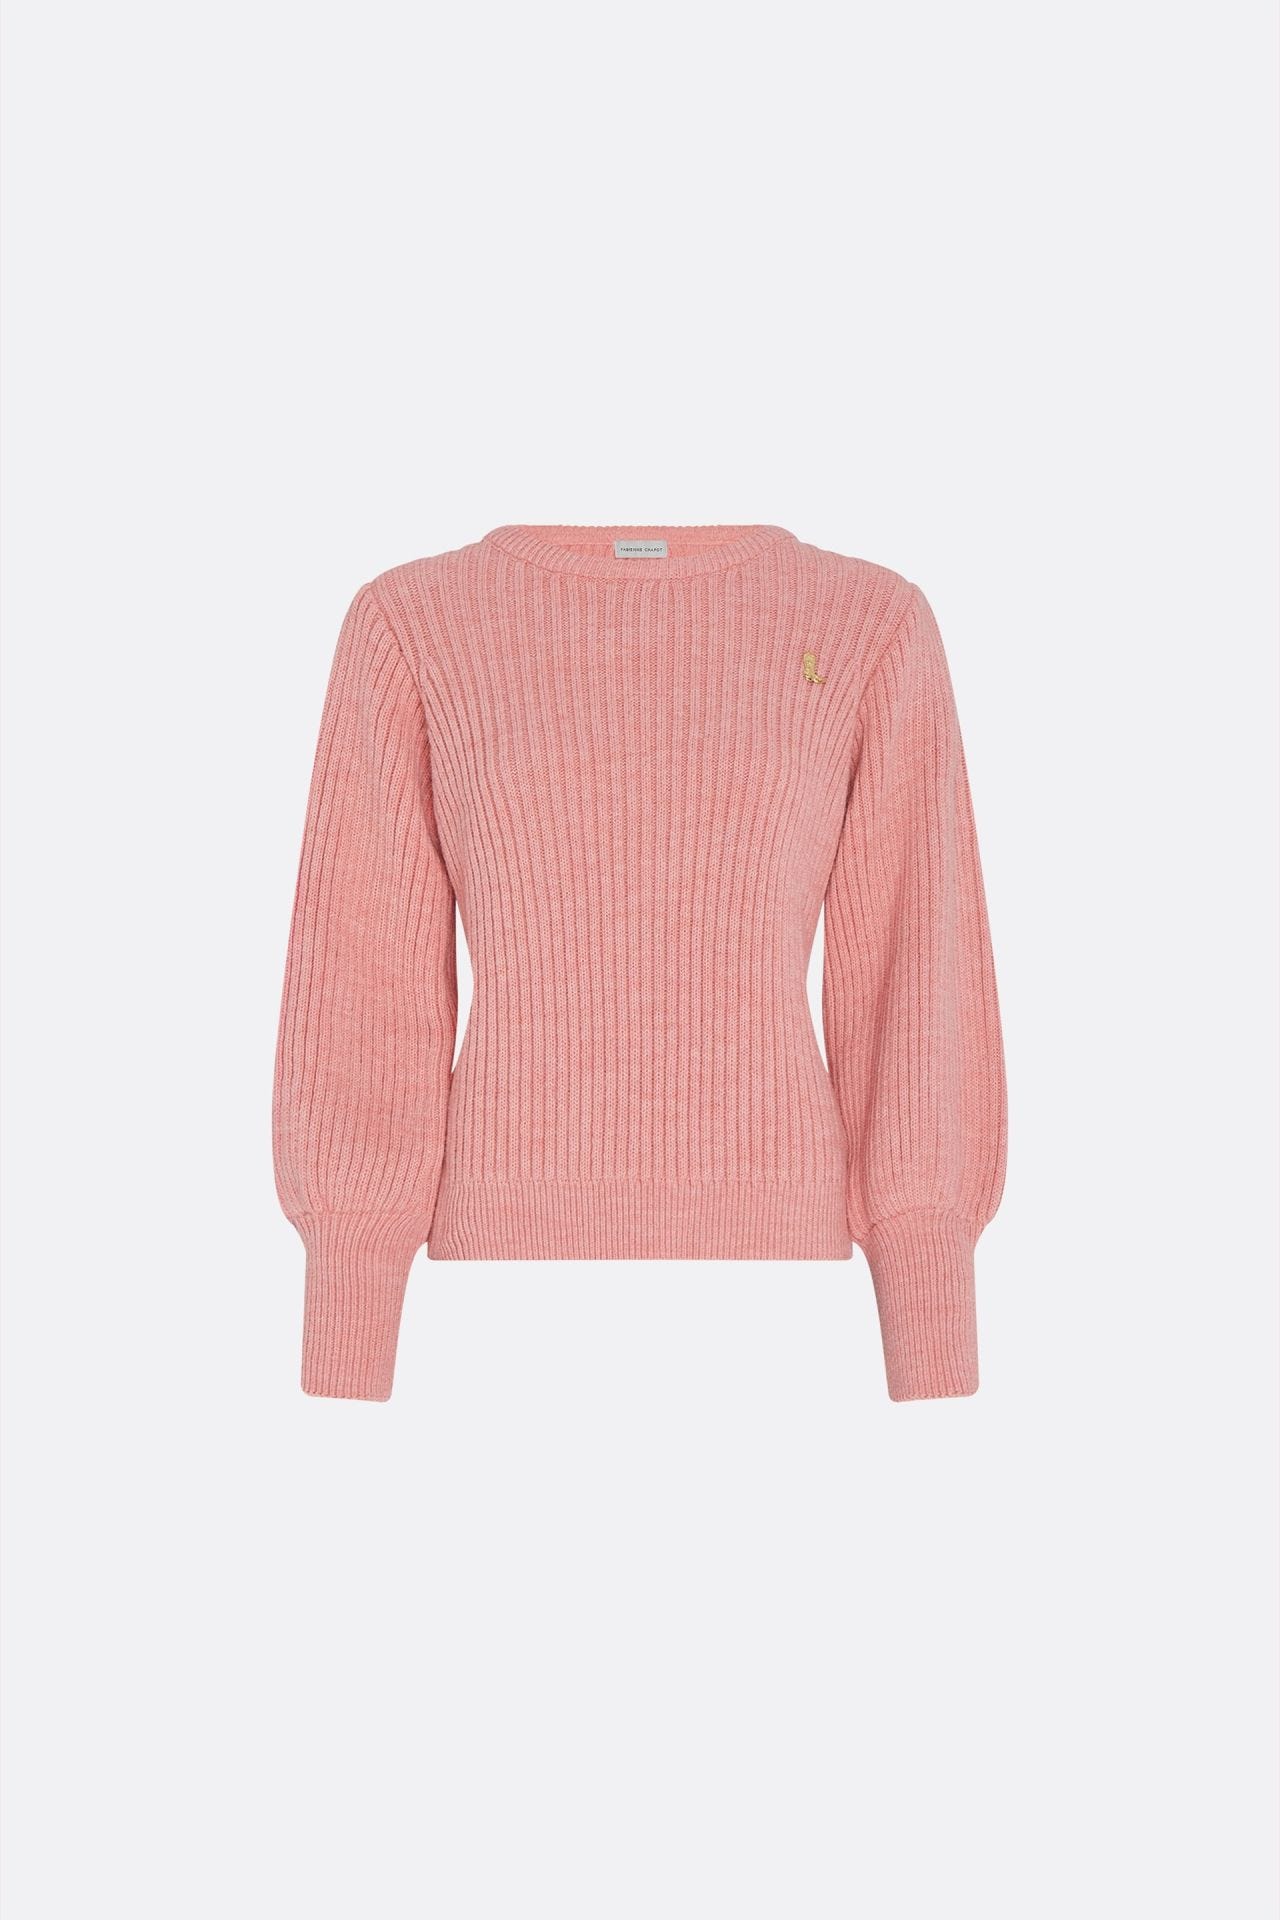 Roze dames trui Fabienne Chapot - Marianne Pull over lovely pink